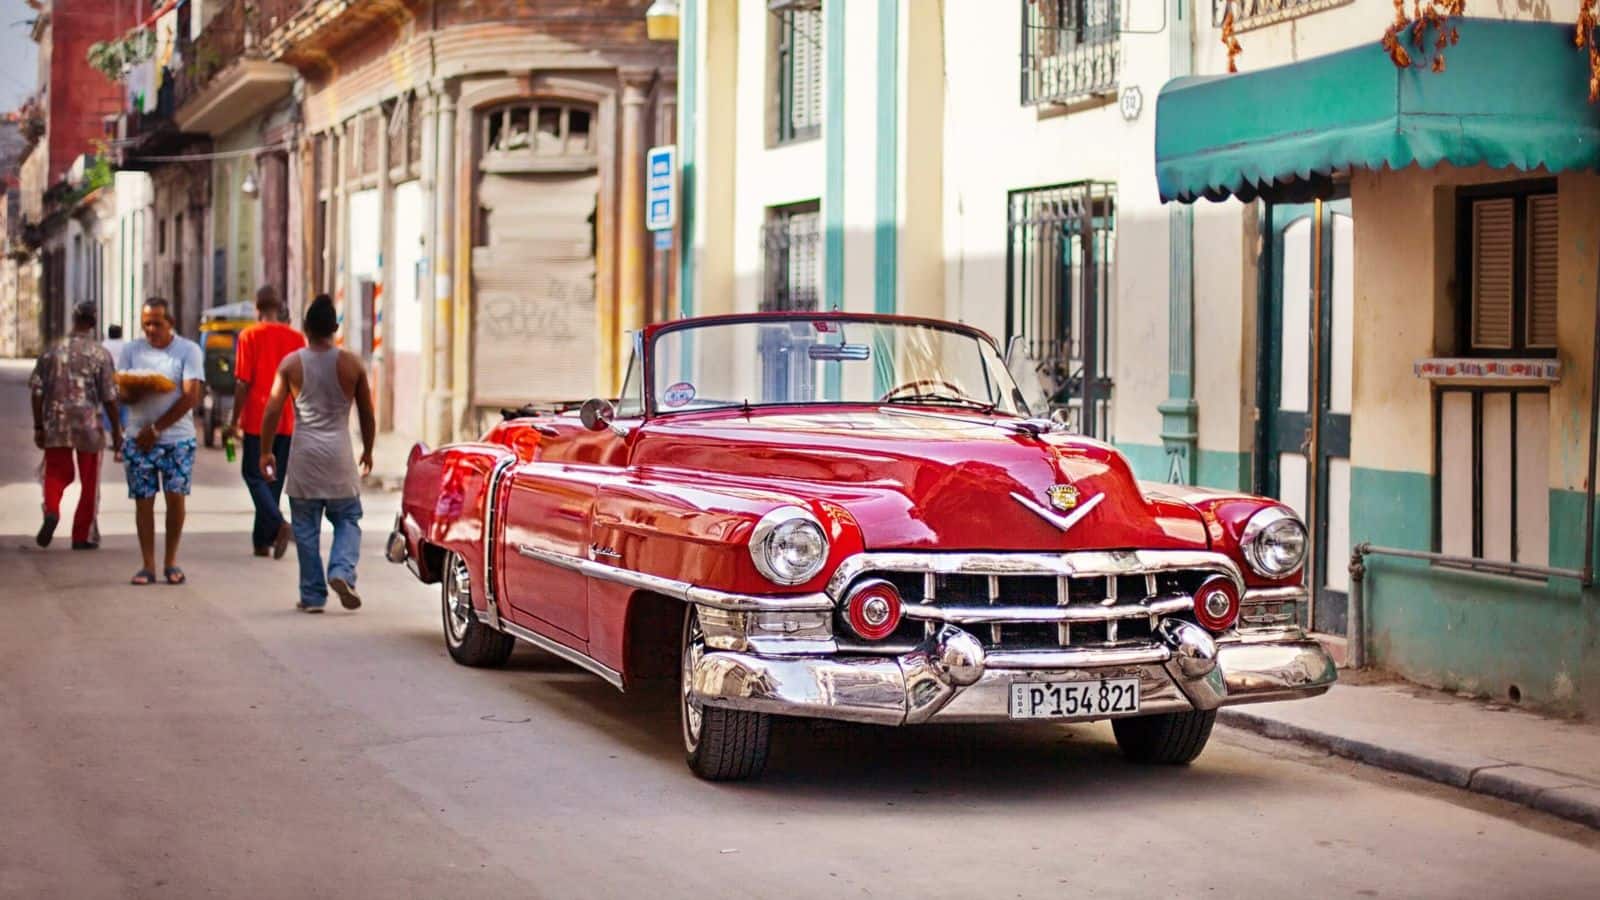 Havana's vintage vehicular voyage is perfect for car lovers